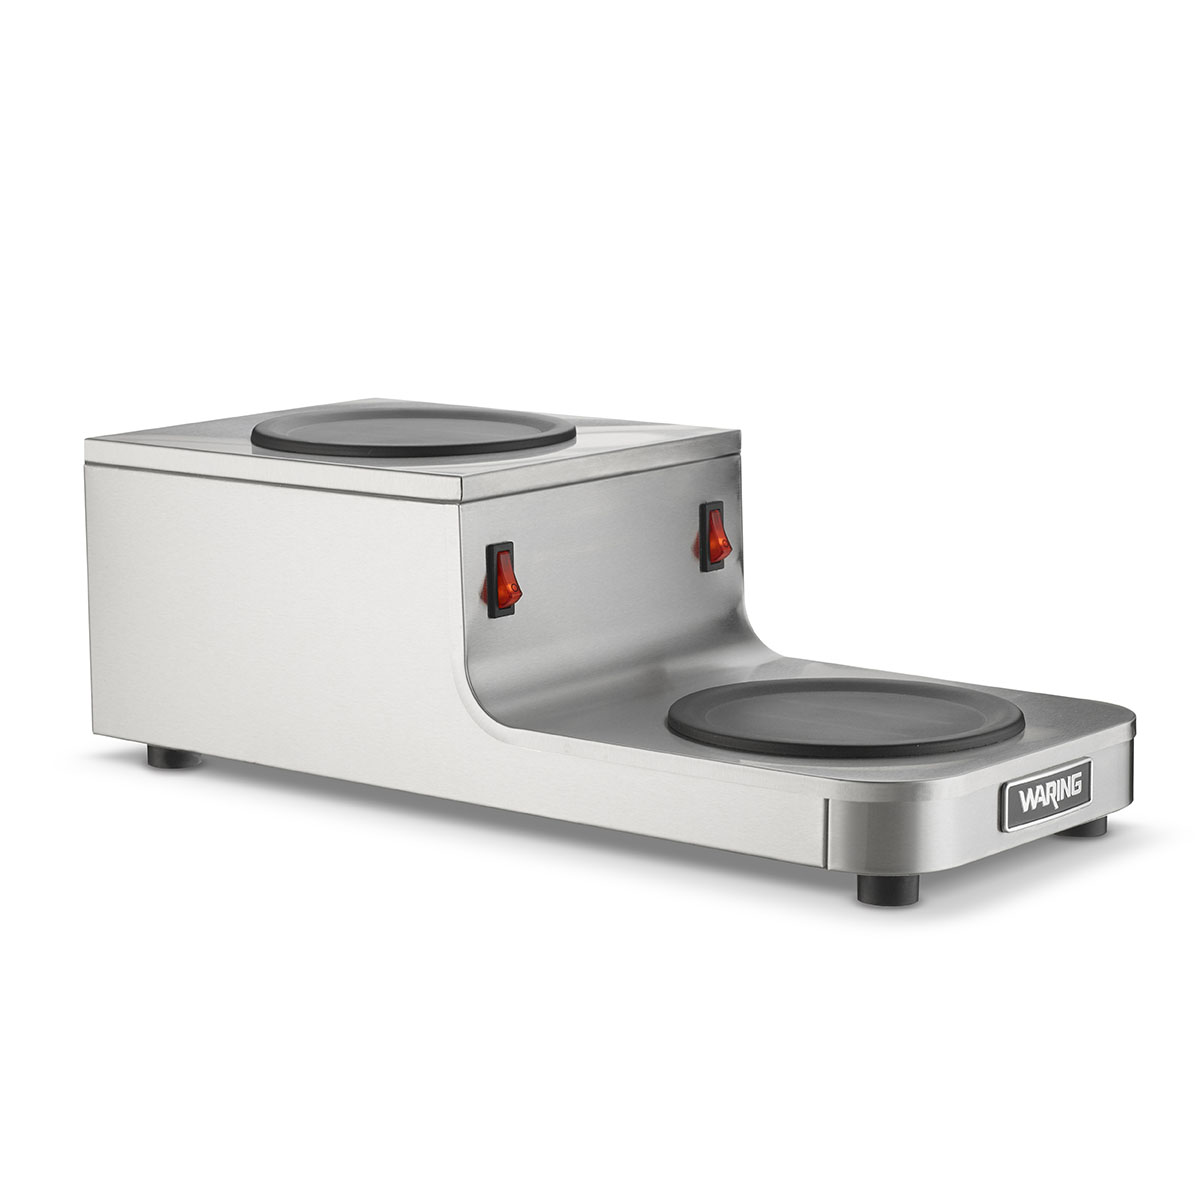 https://www.waringcommercialproducts.com/files/products/wcw20r-waring-step-up-double-coffee-warmer-main-image-1200x1200.jpg